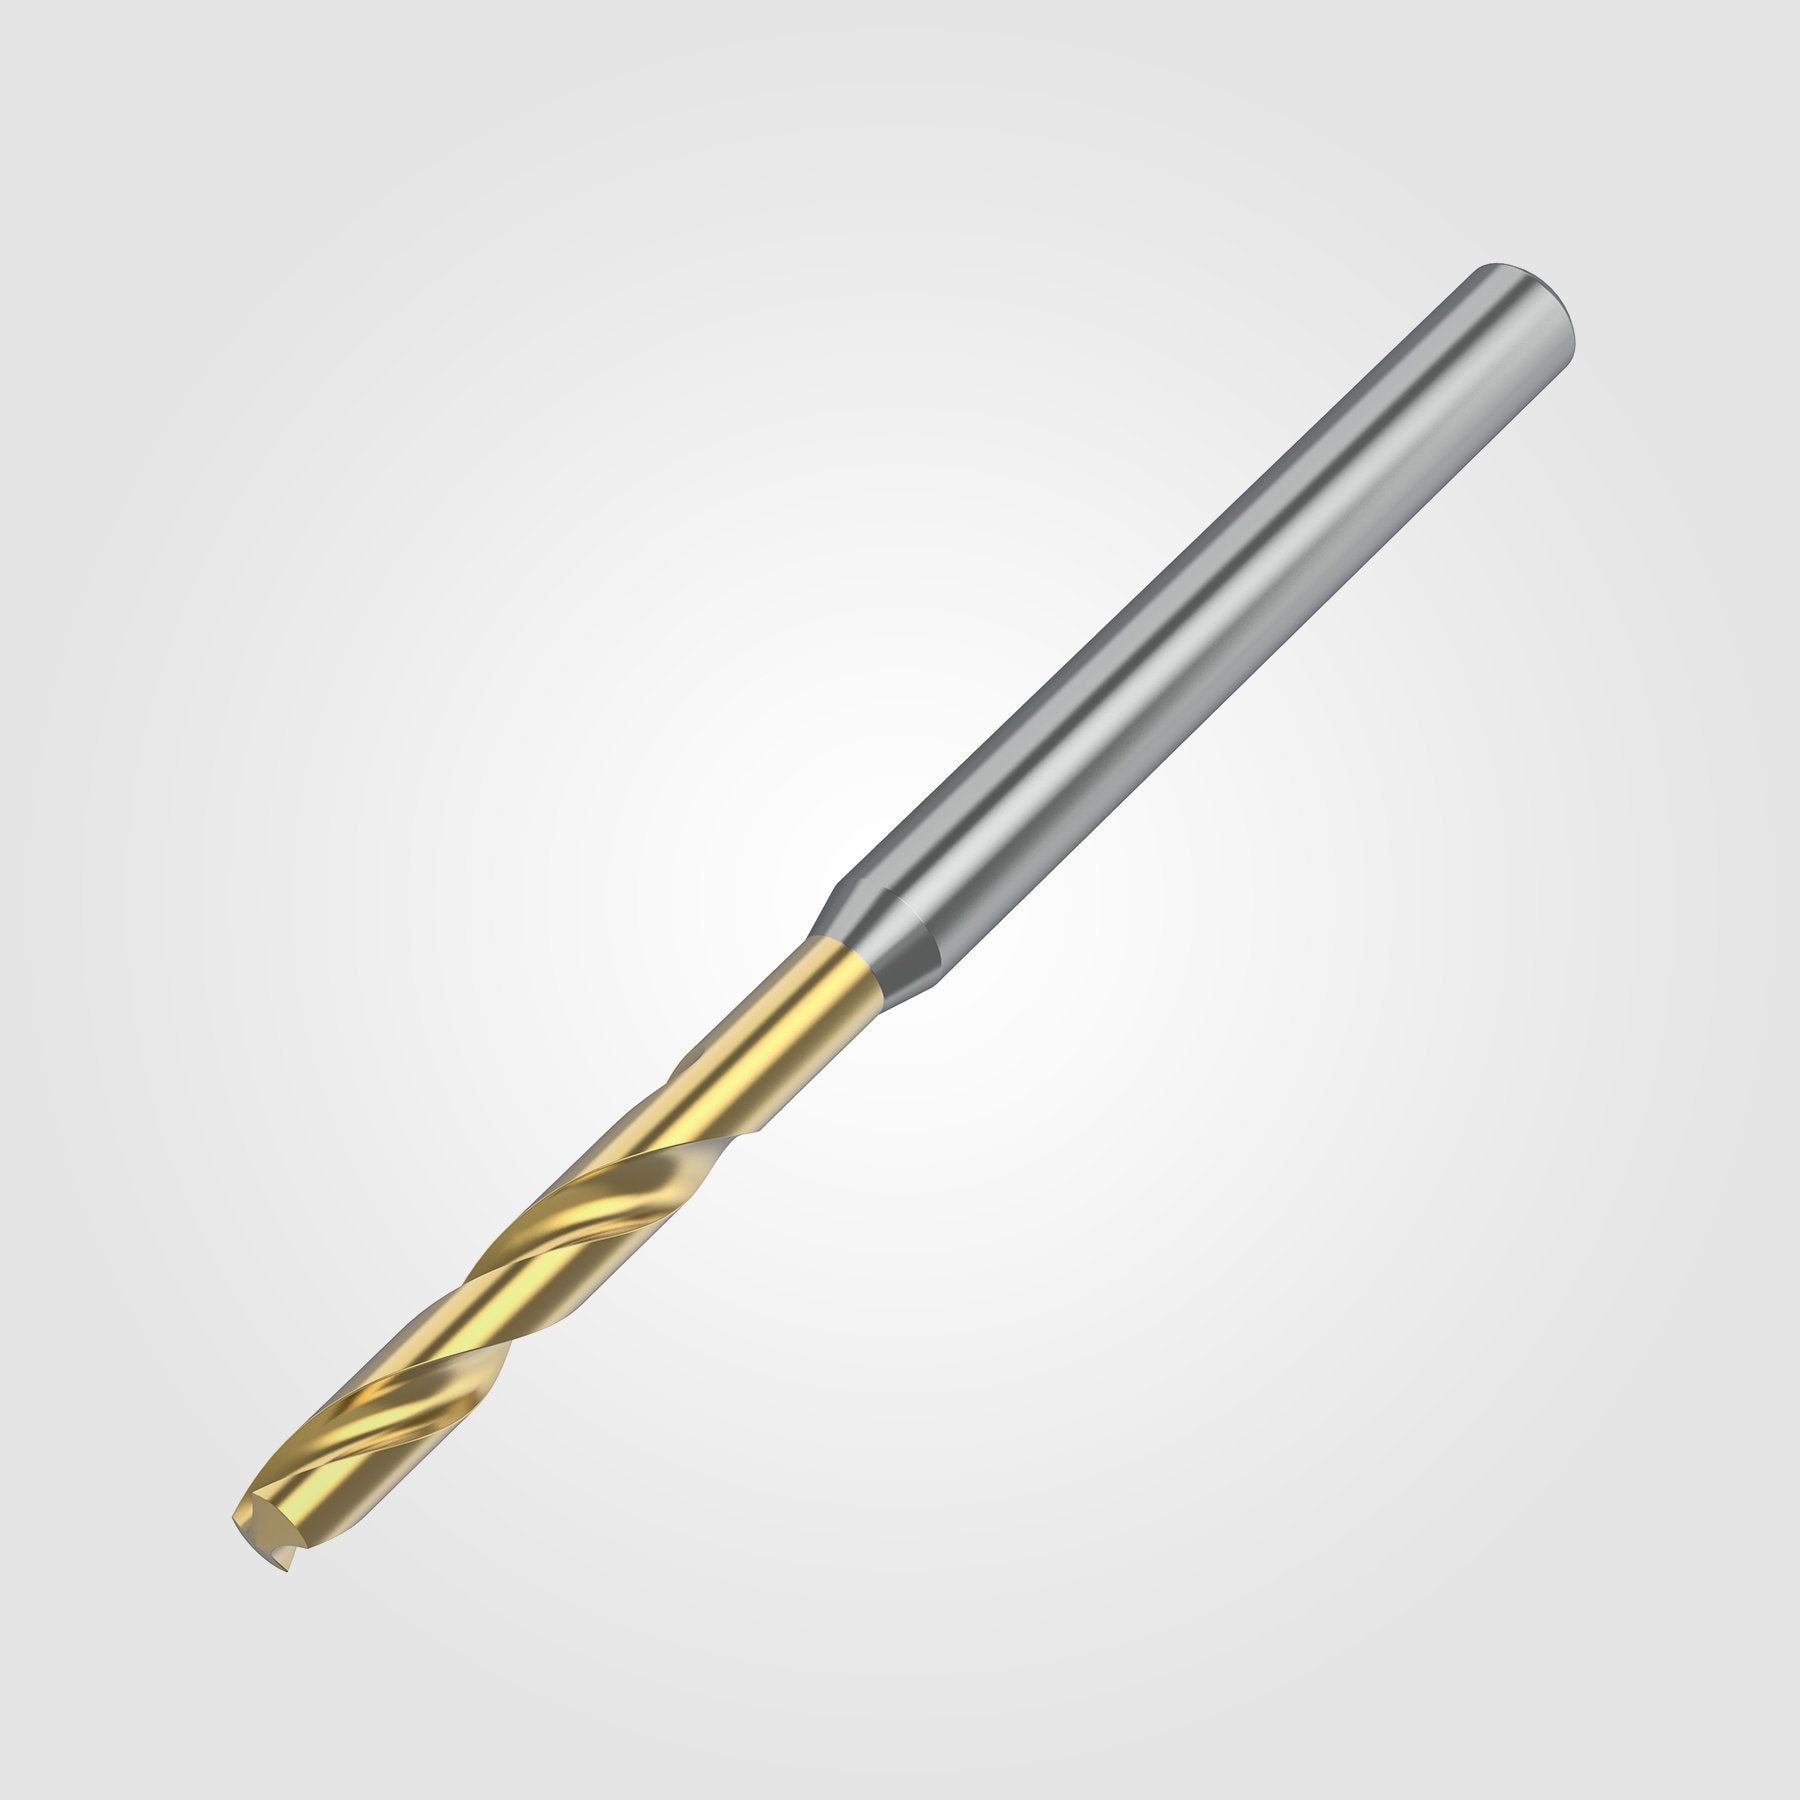 GOdrill (THROUGH COOLANT) | 6.35mm / .2500" / 3xD | SOLID CARBIDE DRILL | 4151152